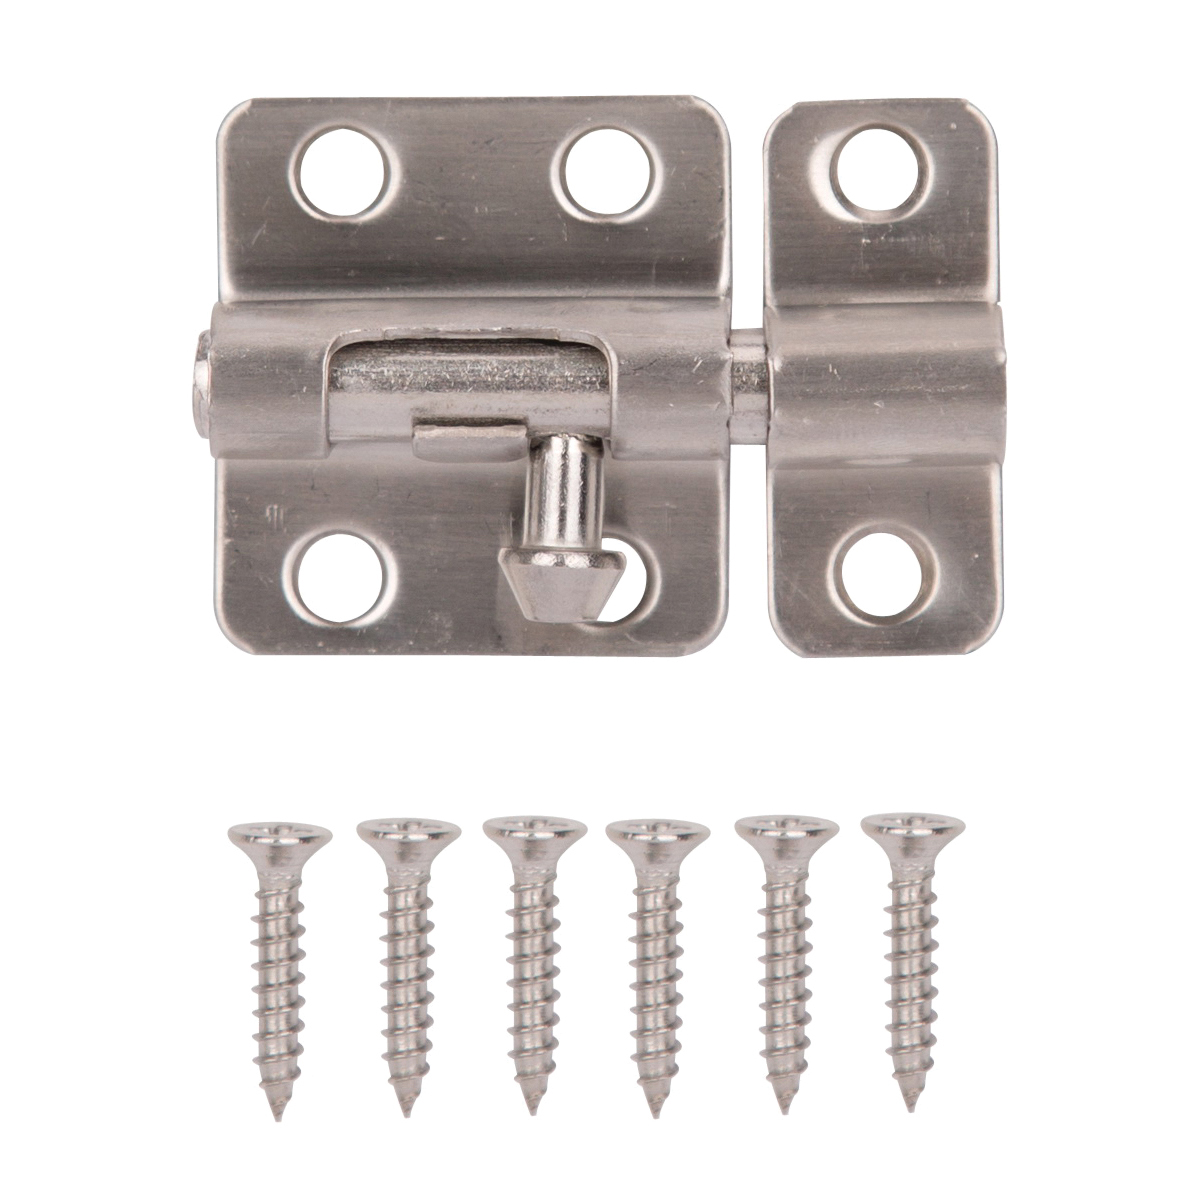 SS-B02-PS Barrel Bolt, 0.31 Dia in Bolt Head, 2 in L Bolt, Stainless Steel, Stainless Steel